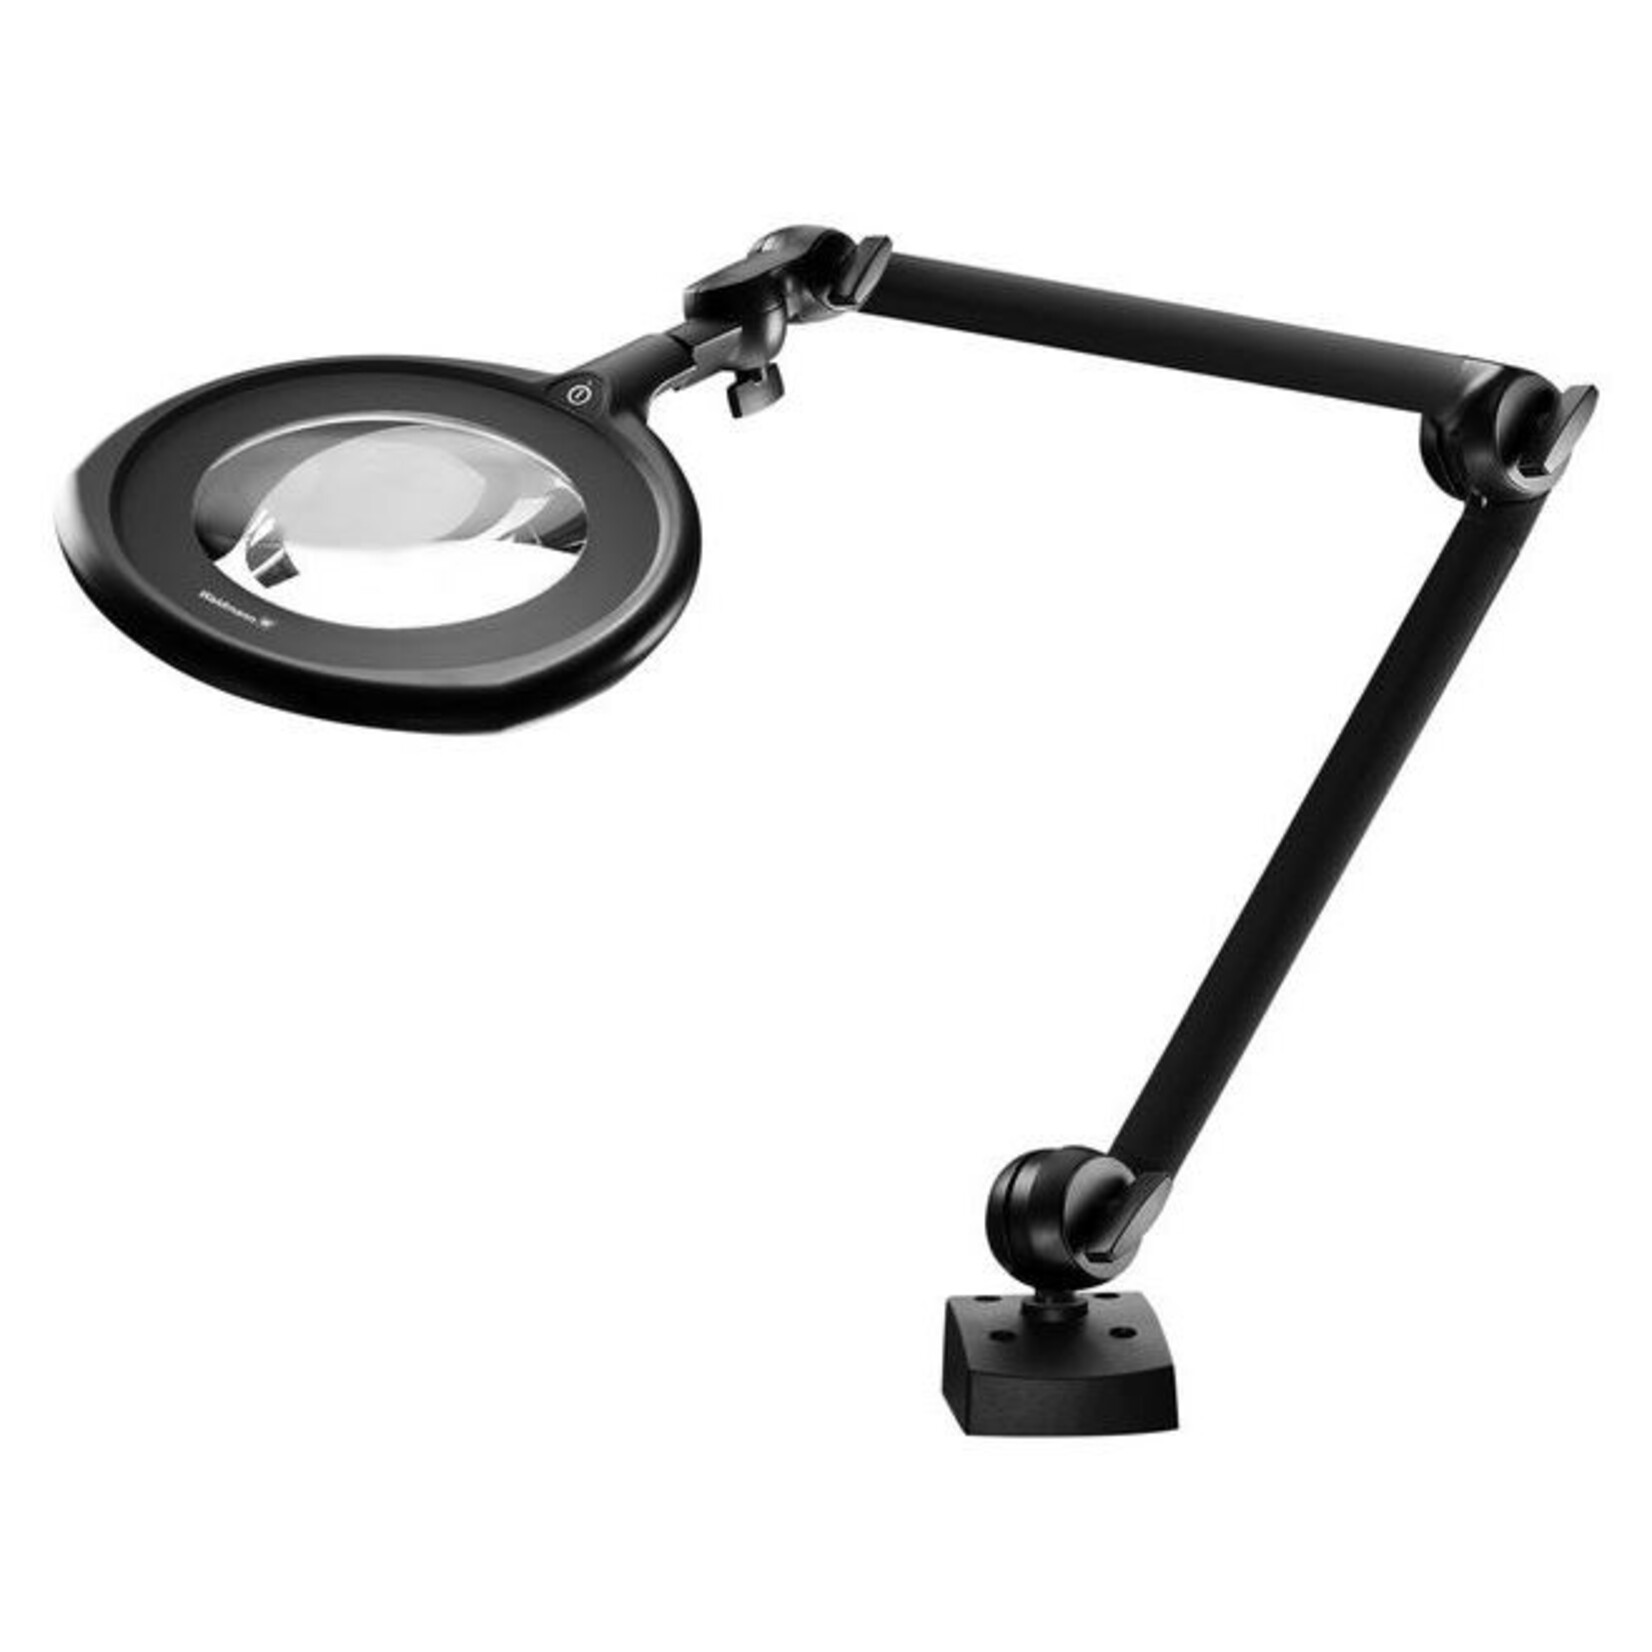 TEVISIO magnifier lamp with anti-reflective glass lens in ESD version